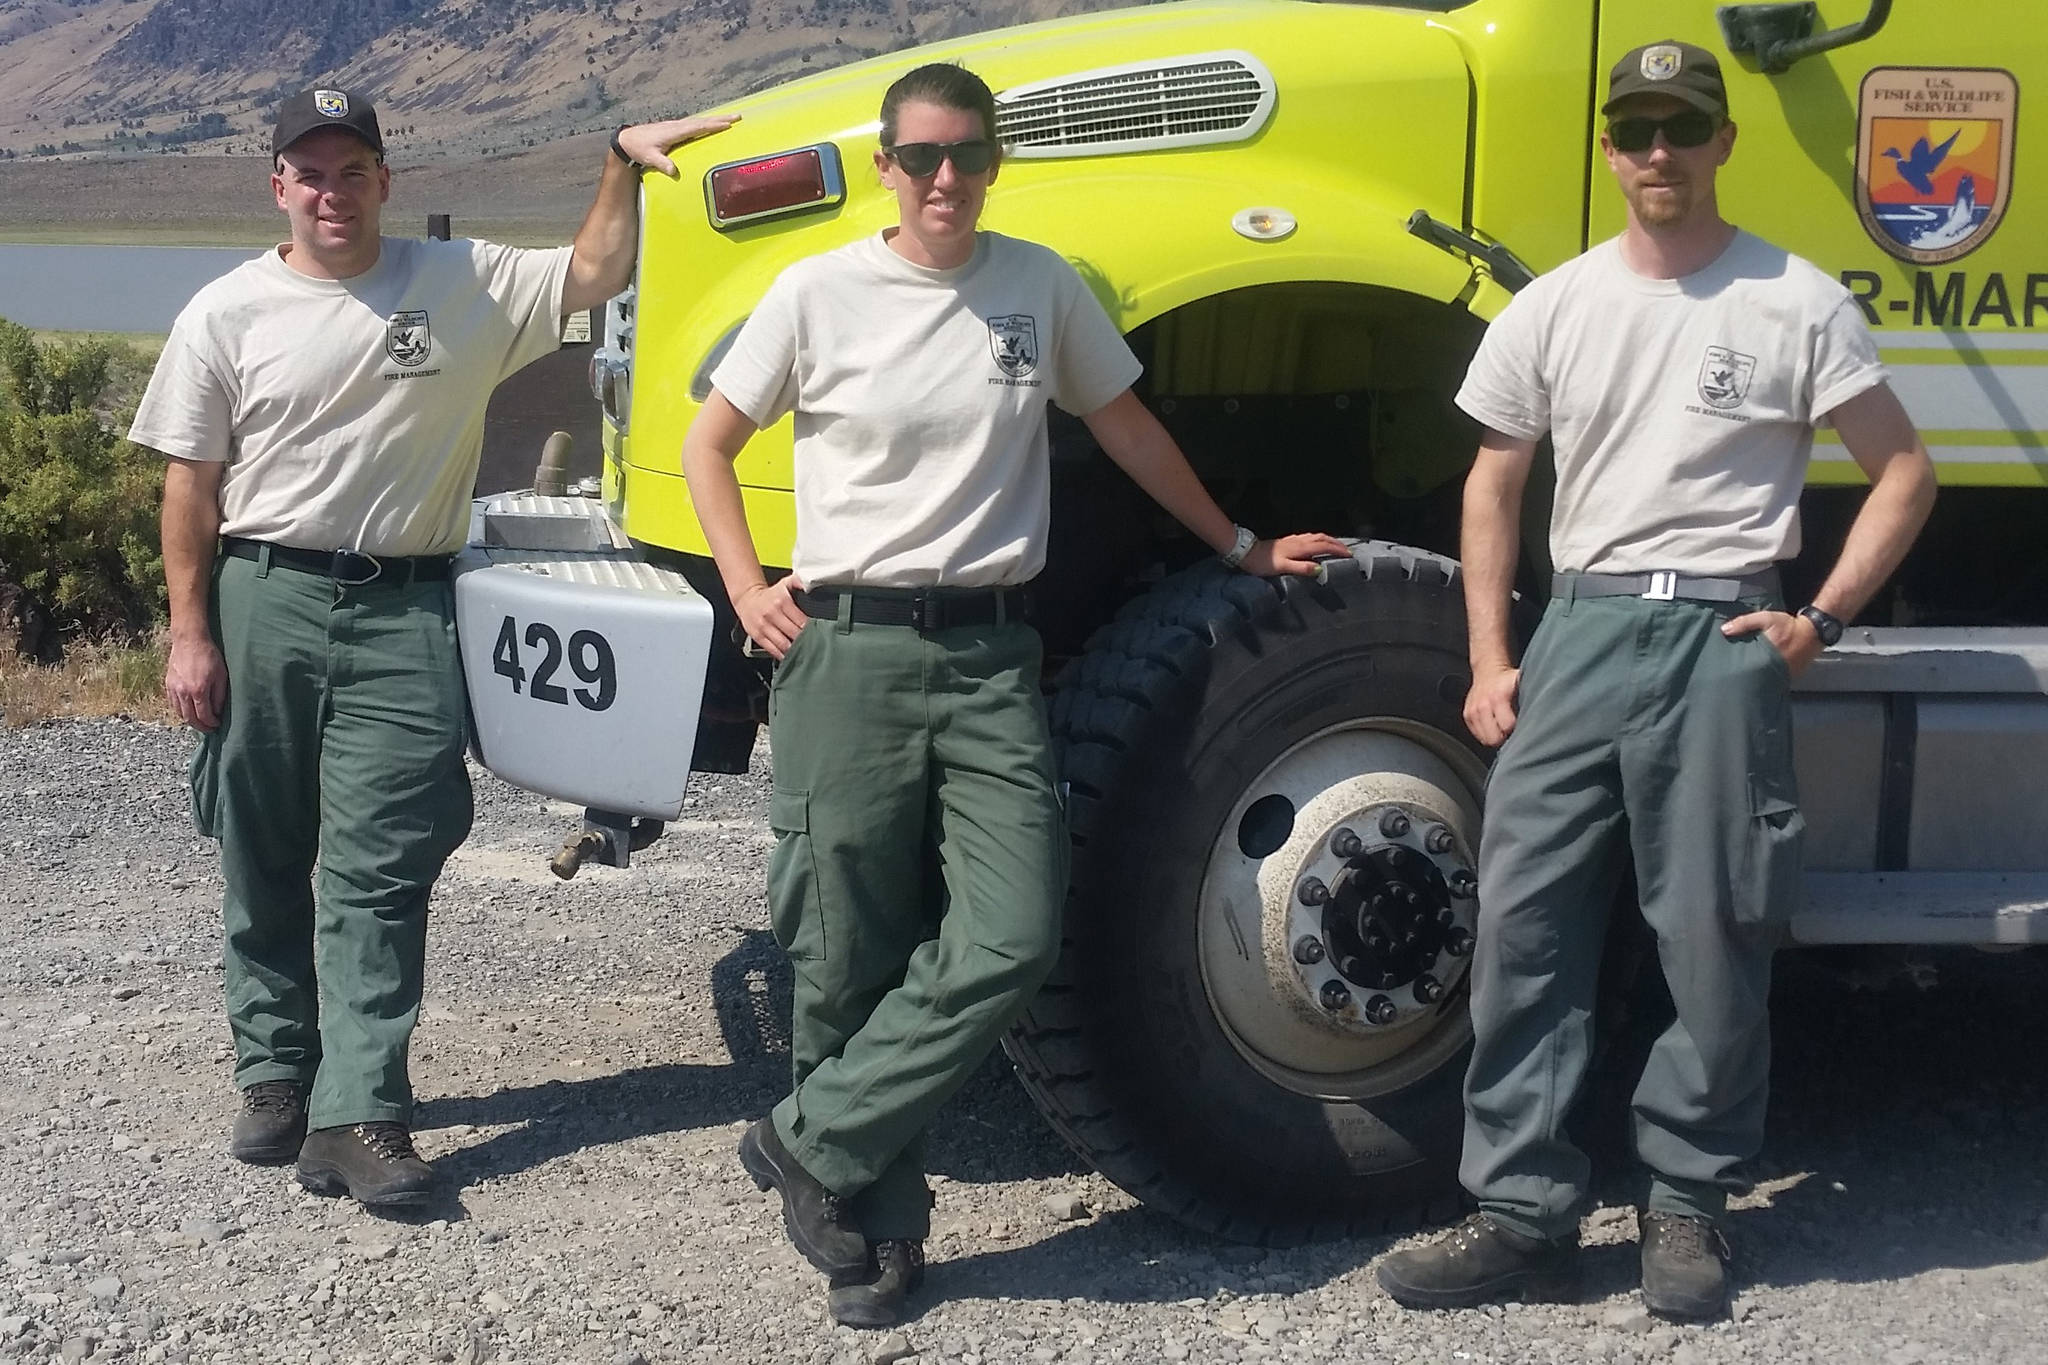 Will Jenks, Christa Kennedy and Scott Johnson on fire assignment at Malheur National Wildlife Refuge last month. (Photo provided by Kenai National Wildlife Refuge)